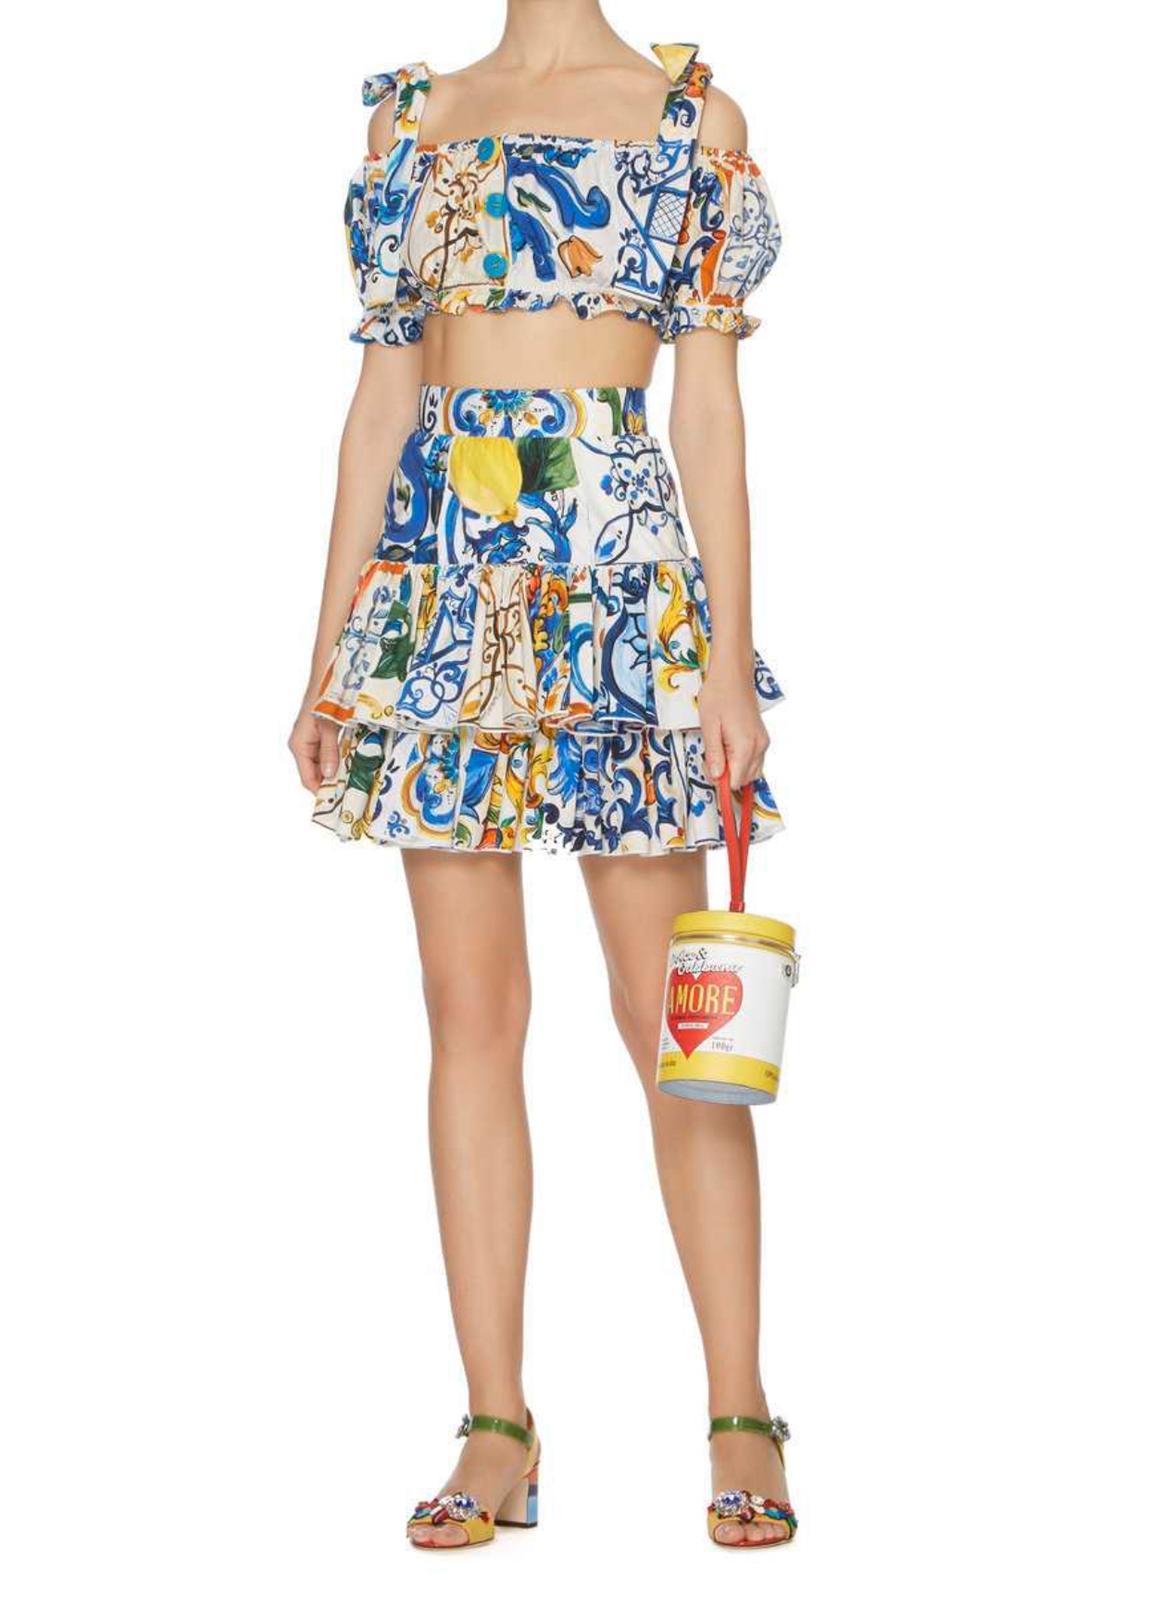 Dolce & Gabbana Sicily Maiolica
printed skirt

Size 40IT UK8, S.

100% cotton
Brand new with the tags!

Please check the matching cropped top!!

Please check my other DG clothing ,
beachwear, shoes, Sicily bag &
accessories in this beautiful print!